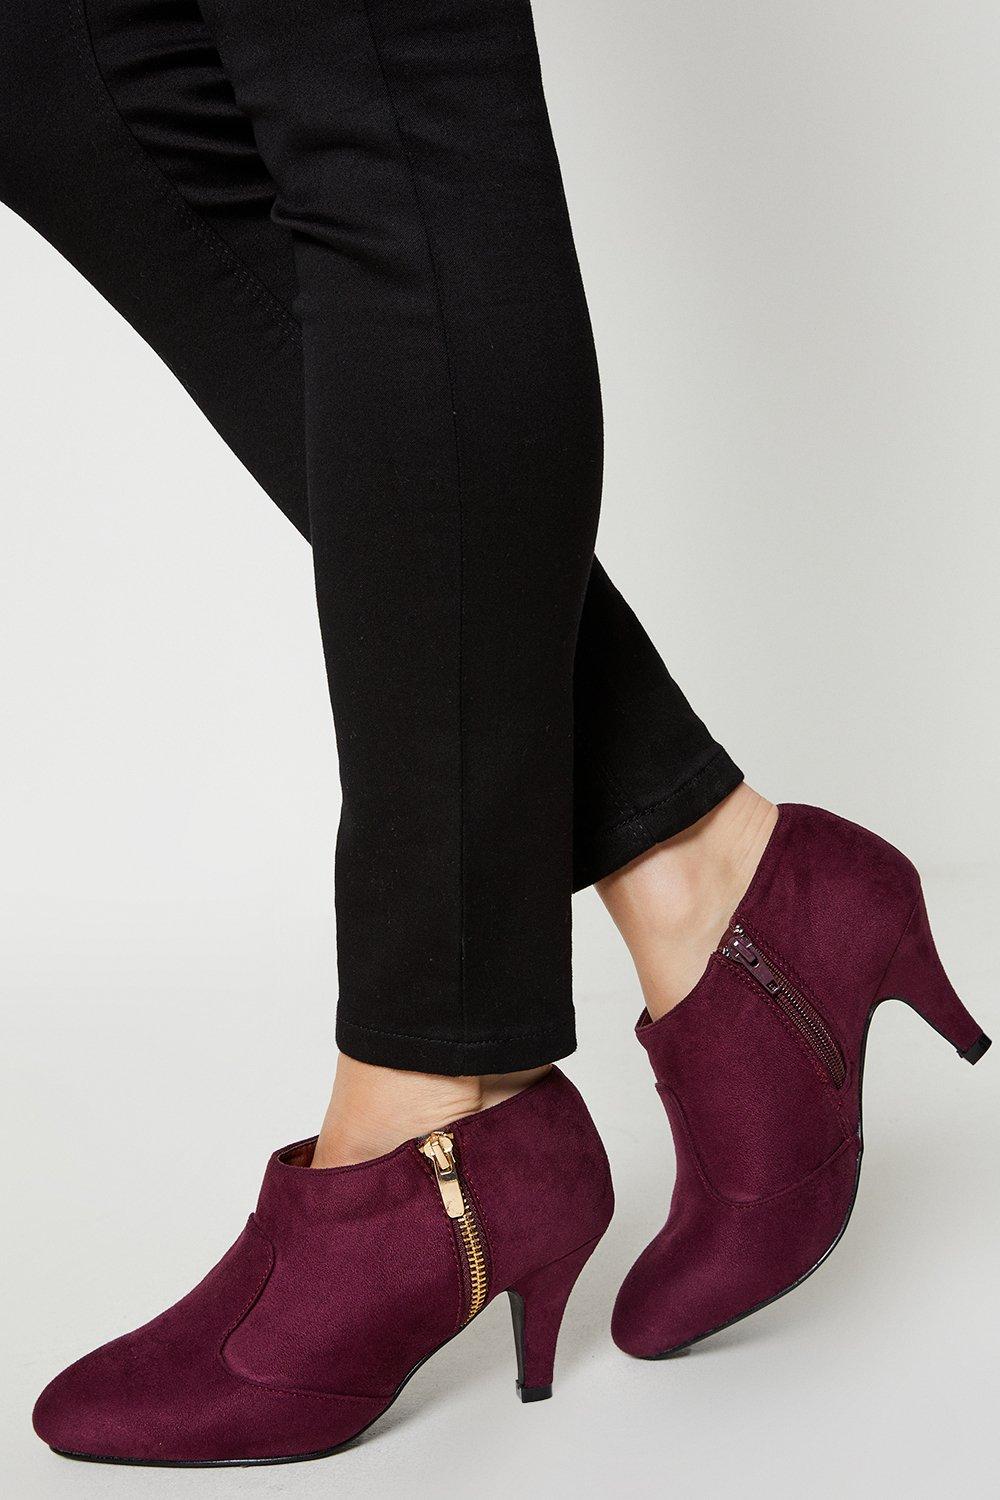 Women’s Good For The Sole: Wide Fit Marley Comfort Zip Heeled Ankle Boots - burgundy - 6